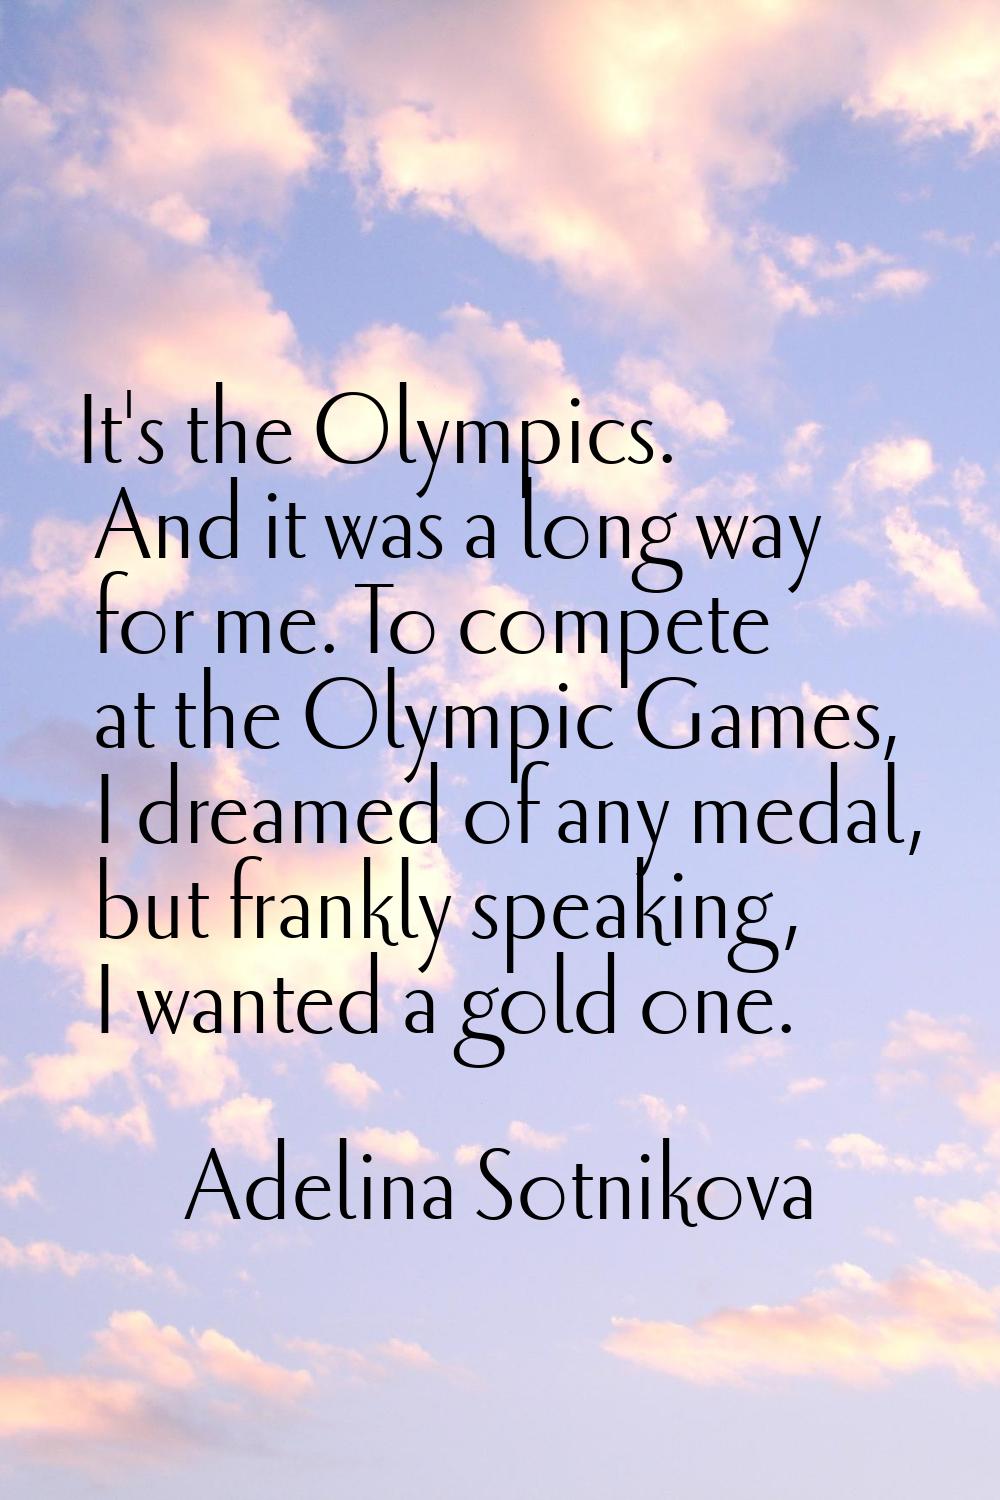 It's the Olympics. And it was a long way for me. To compete at the Olympic Games, I dreamed of any 